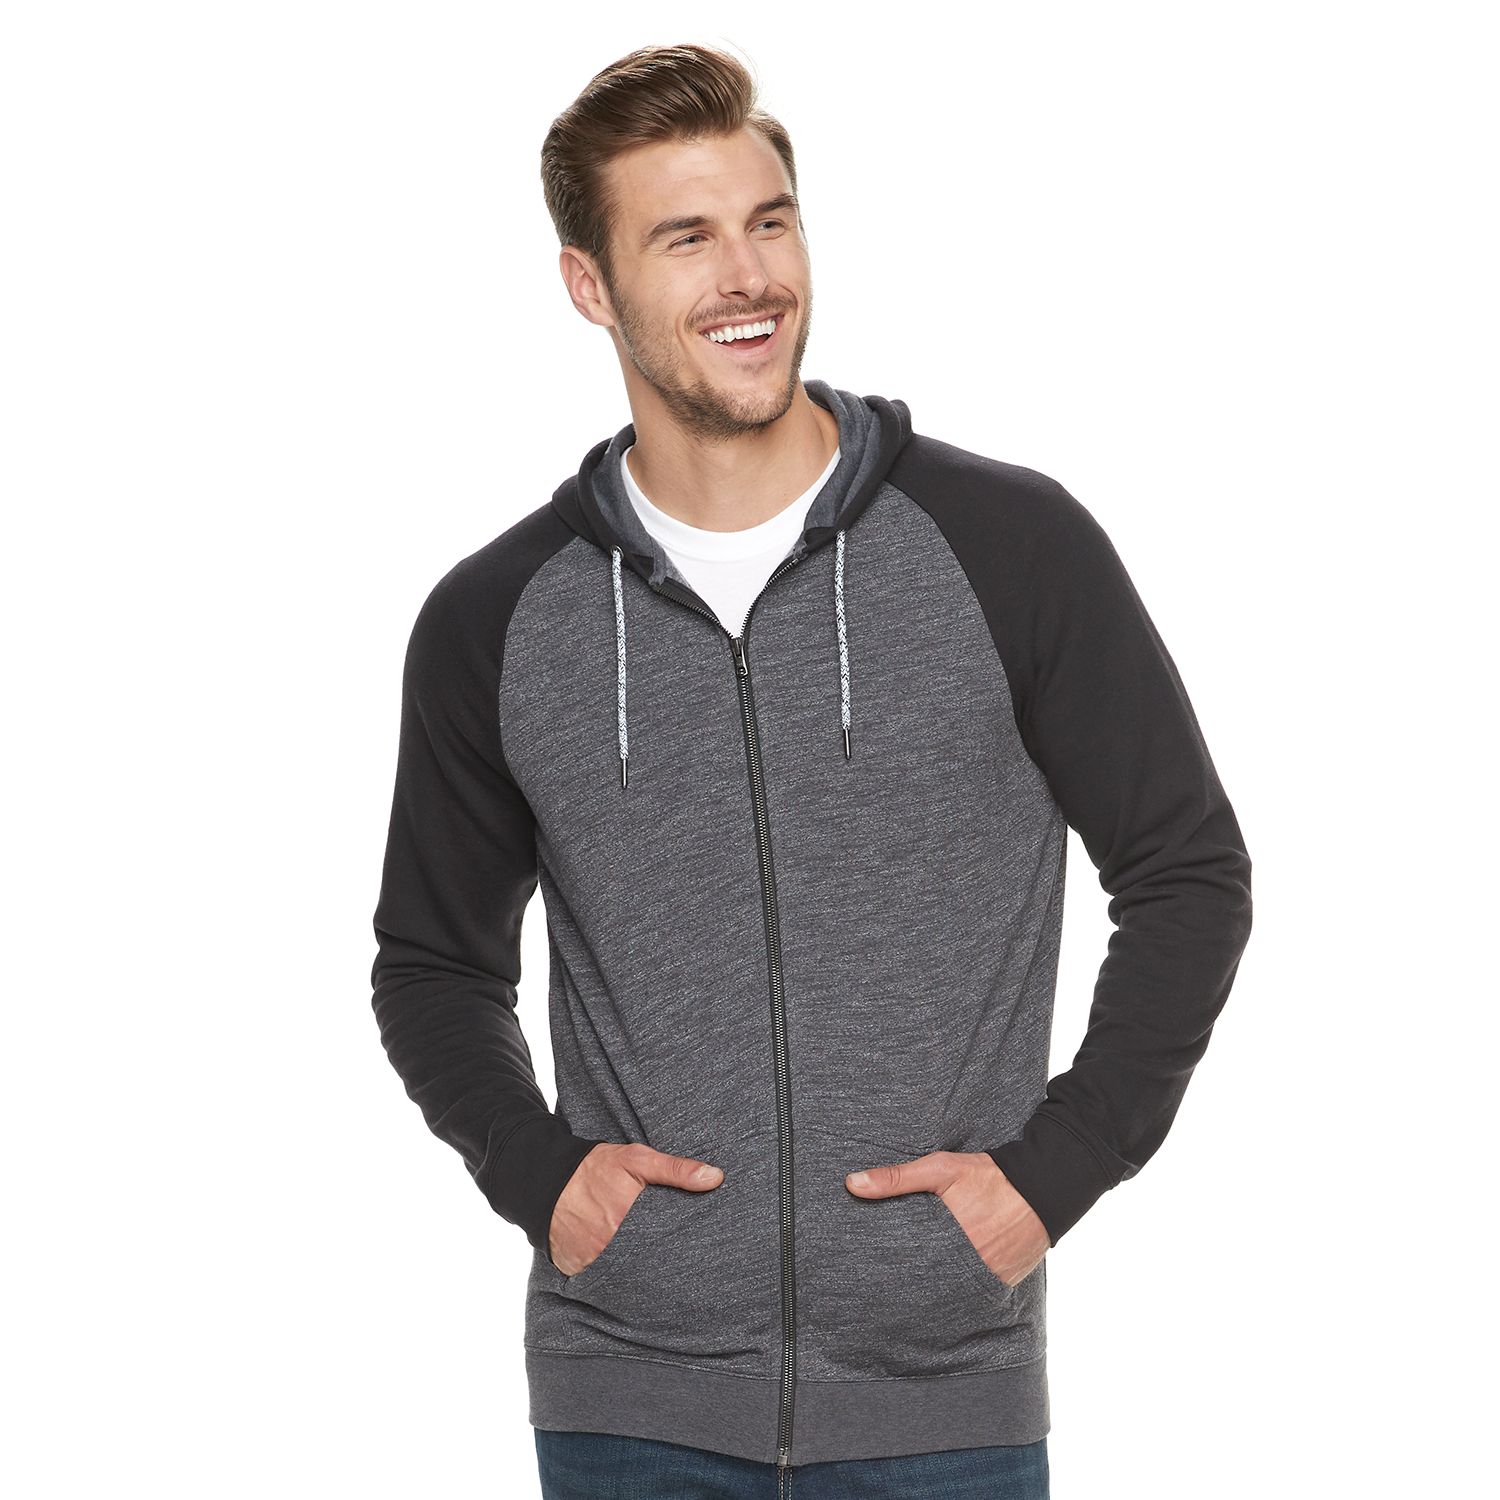 awesomely soft ultimate hoodie